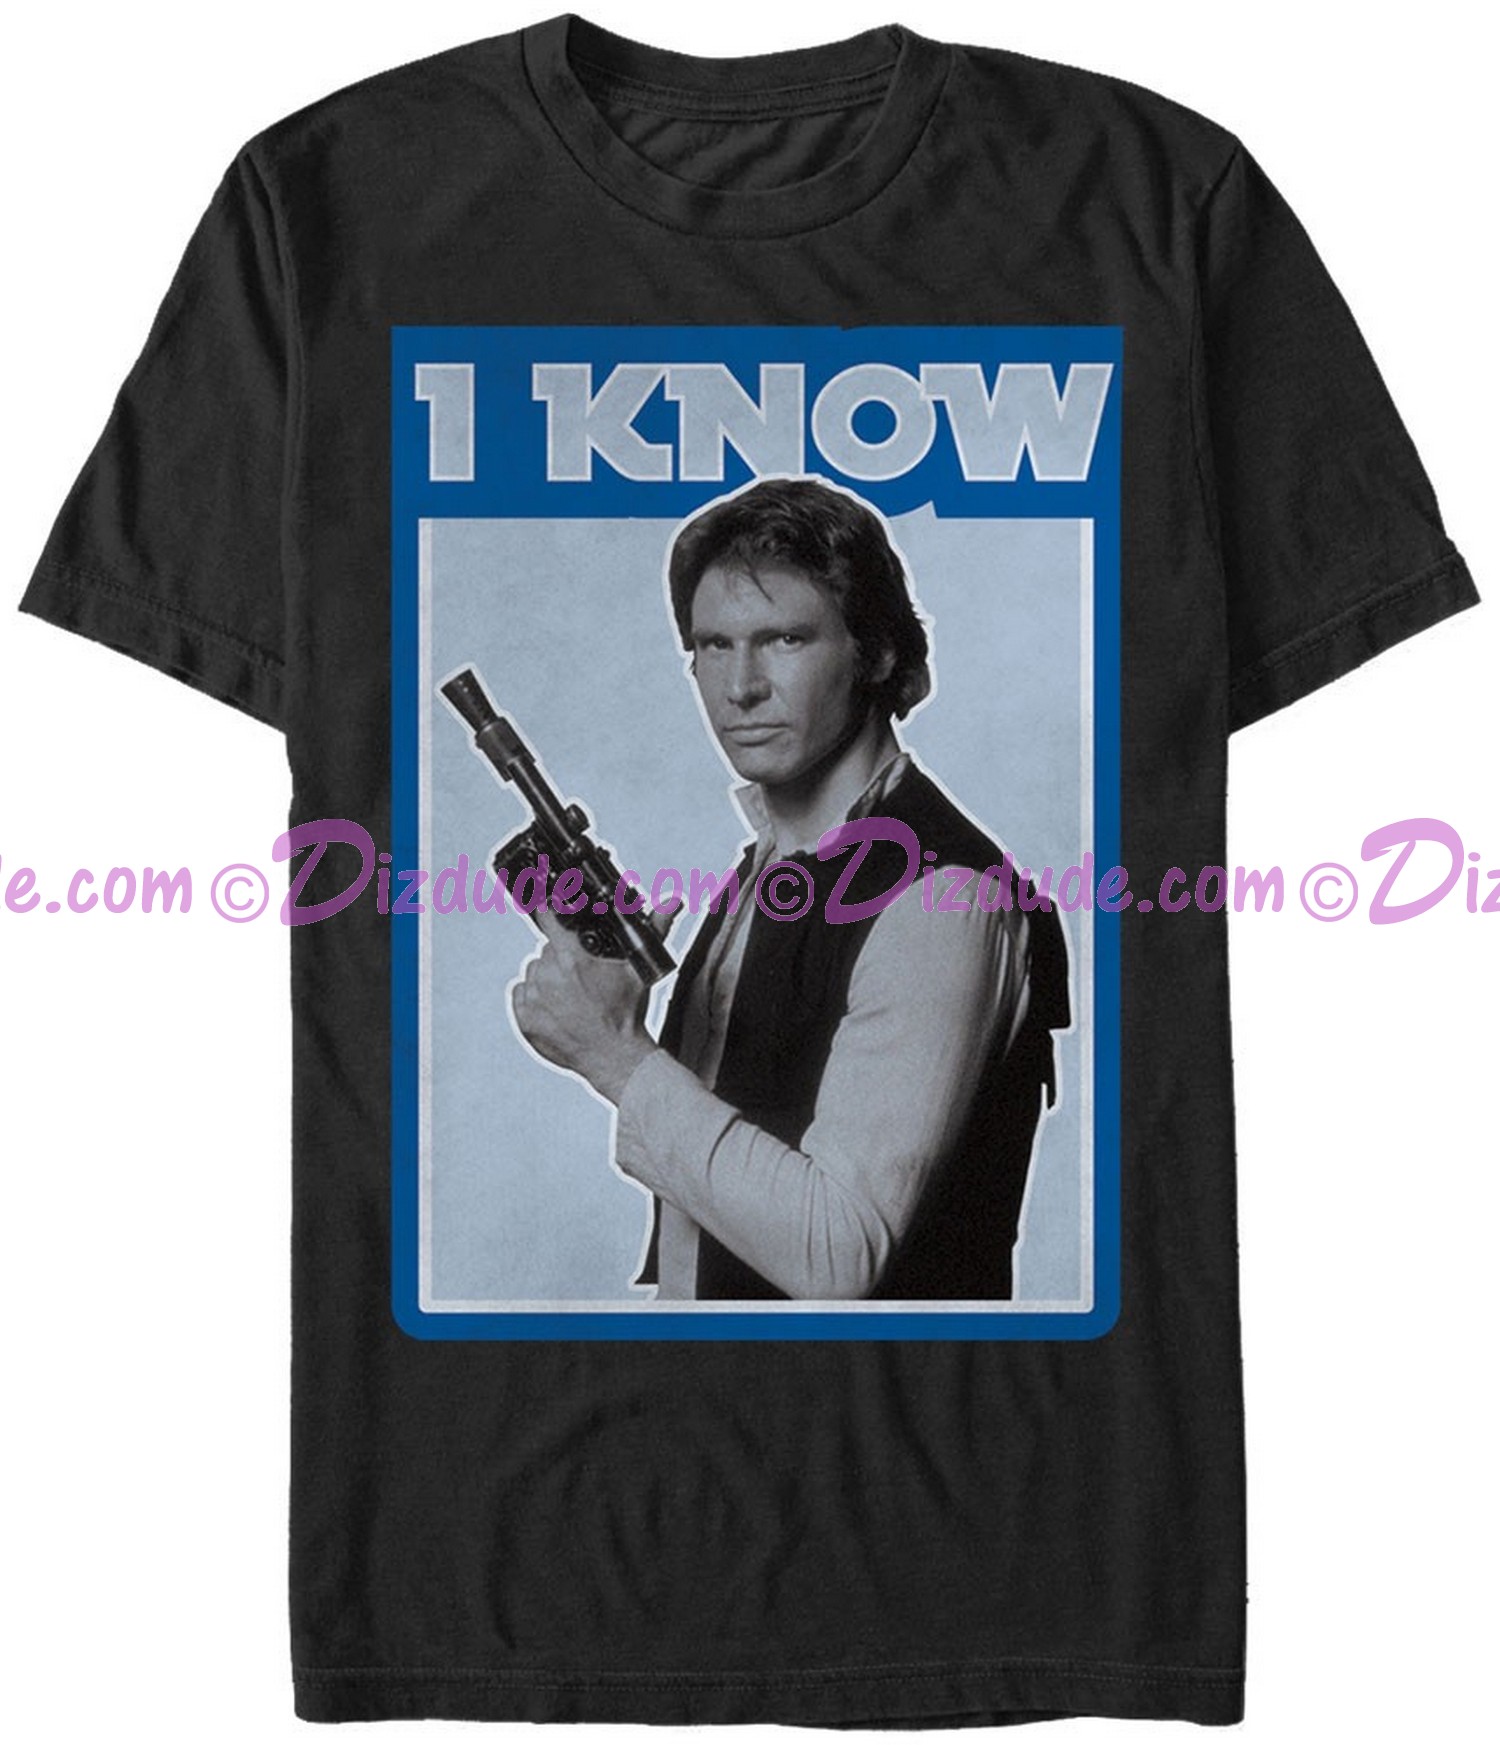 Star Wars Han Solo Famous Love Quote "I Know" Adult T-Shirt (Tshirt, T shirt or Tee) © Dizdude.com